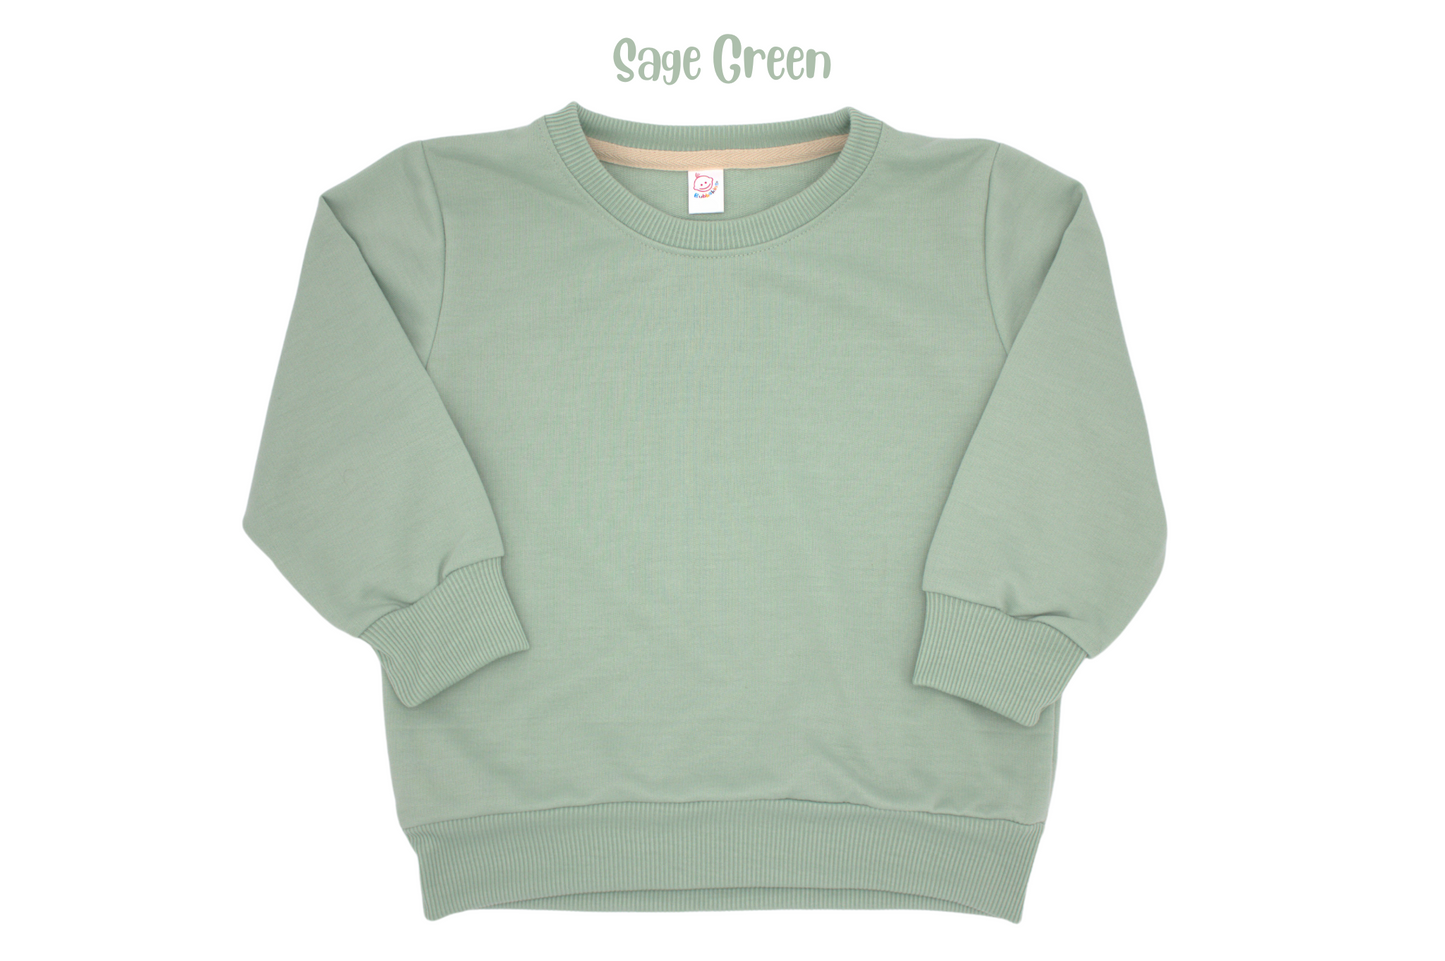 Adult 100% Polyester Sweatshirt: Soft Polyester Blank Apparel for